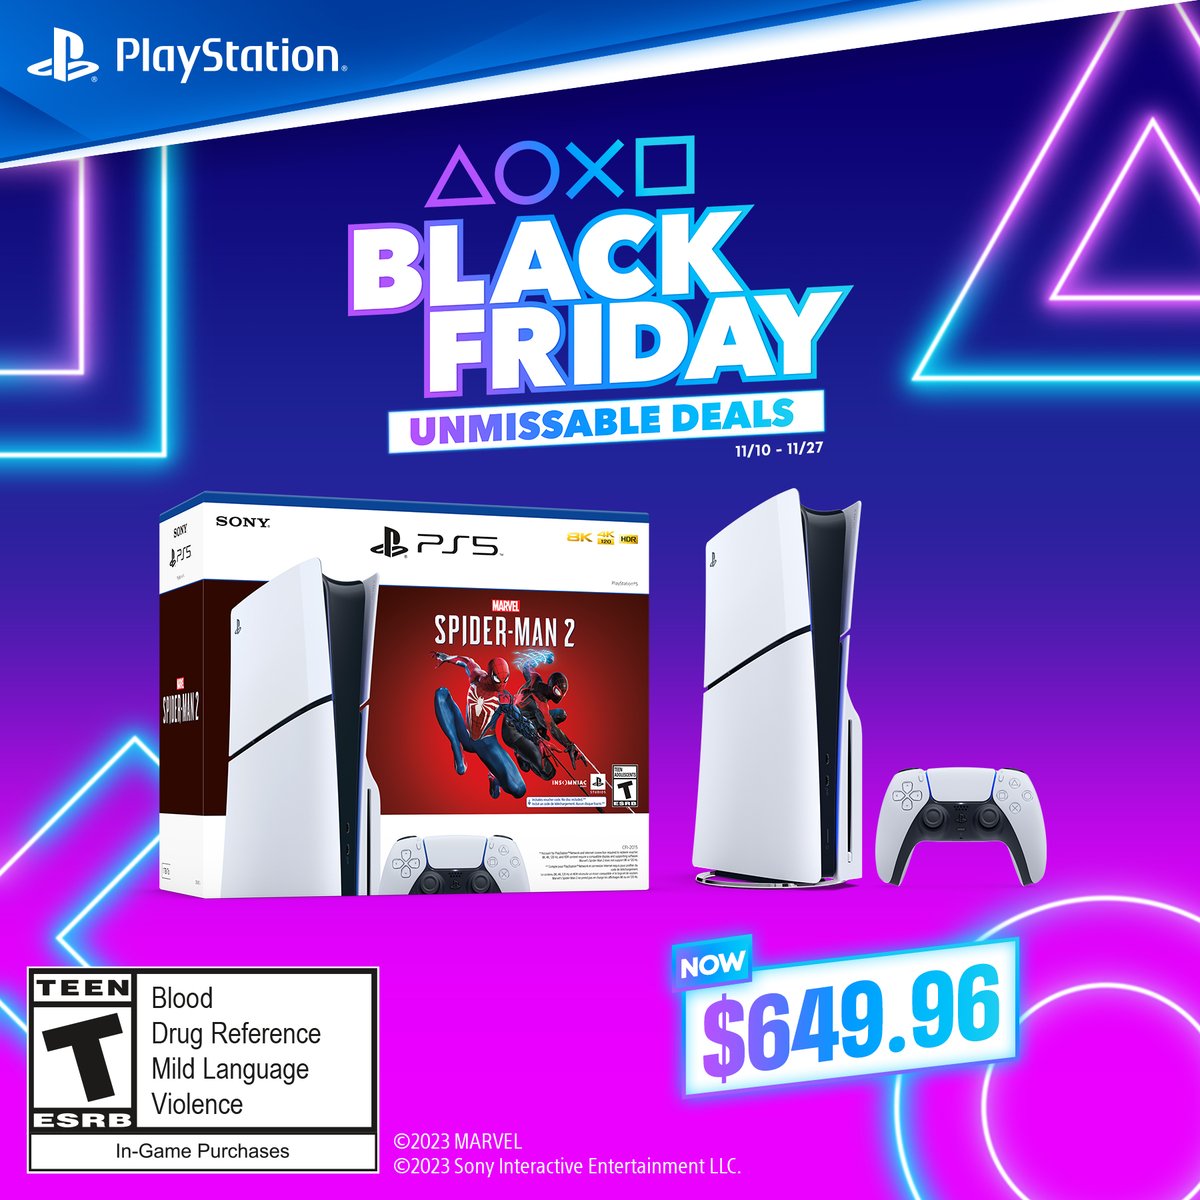 Swing by Walmart Canada to take advantage of Black Friday deals! 🕸️ Like the PS5 Slim Marvel's Spider-Man 2 bundle with $89.96 in bonus value and includes: 🤍 PS5 Slim Console 🎮 DualSense Wireless Controller 🎟️ Marvel's Spider-Man 2 Voucher ➡️ ms.spr.ly/6016iyPNo